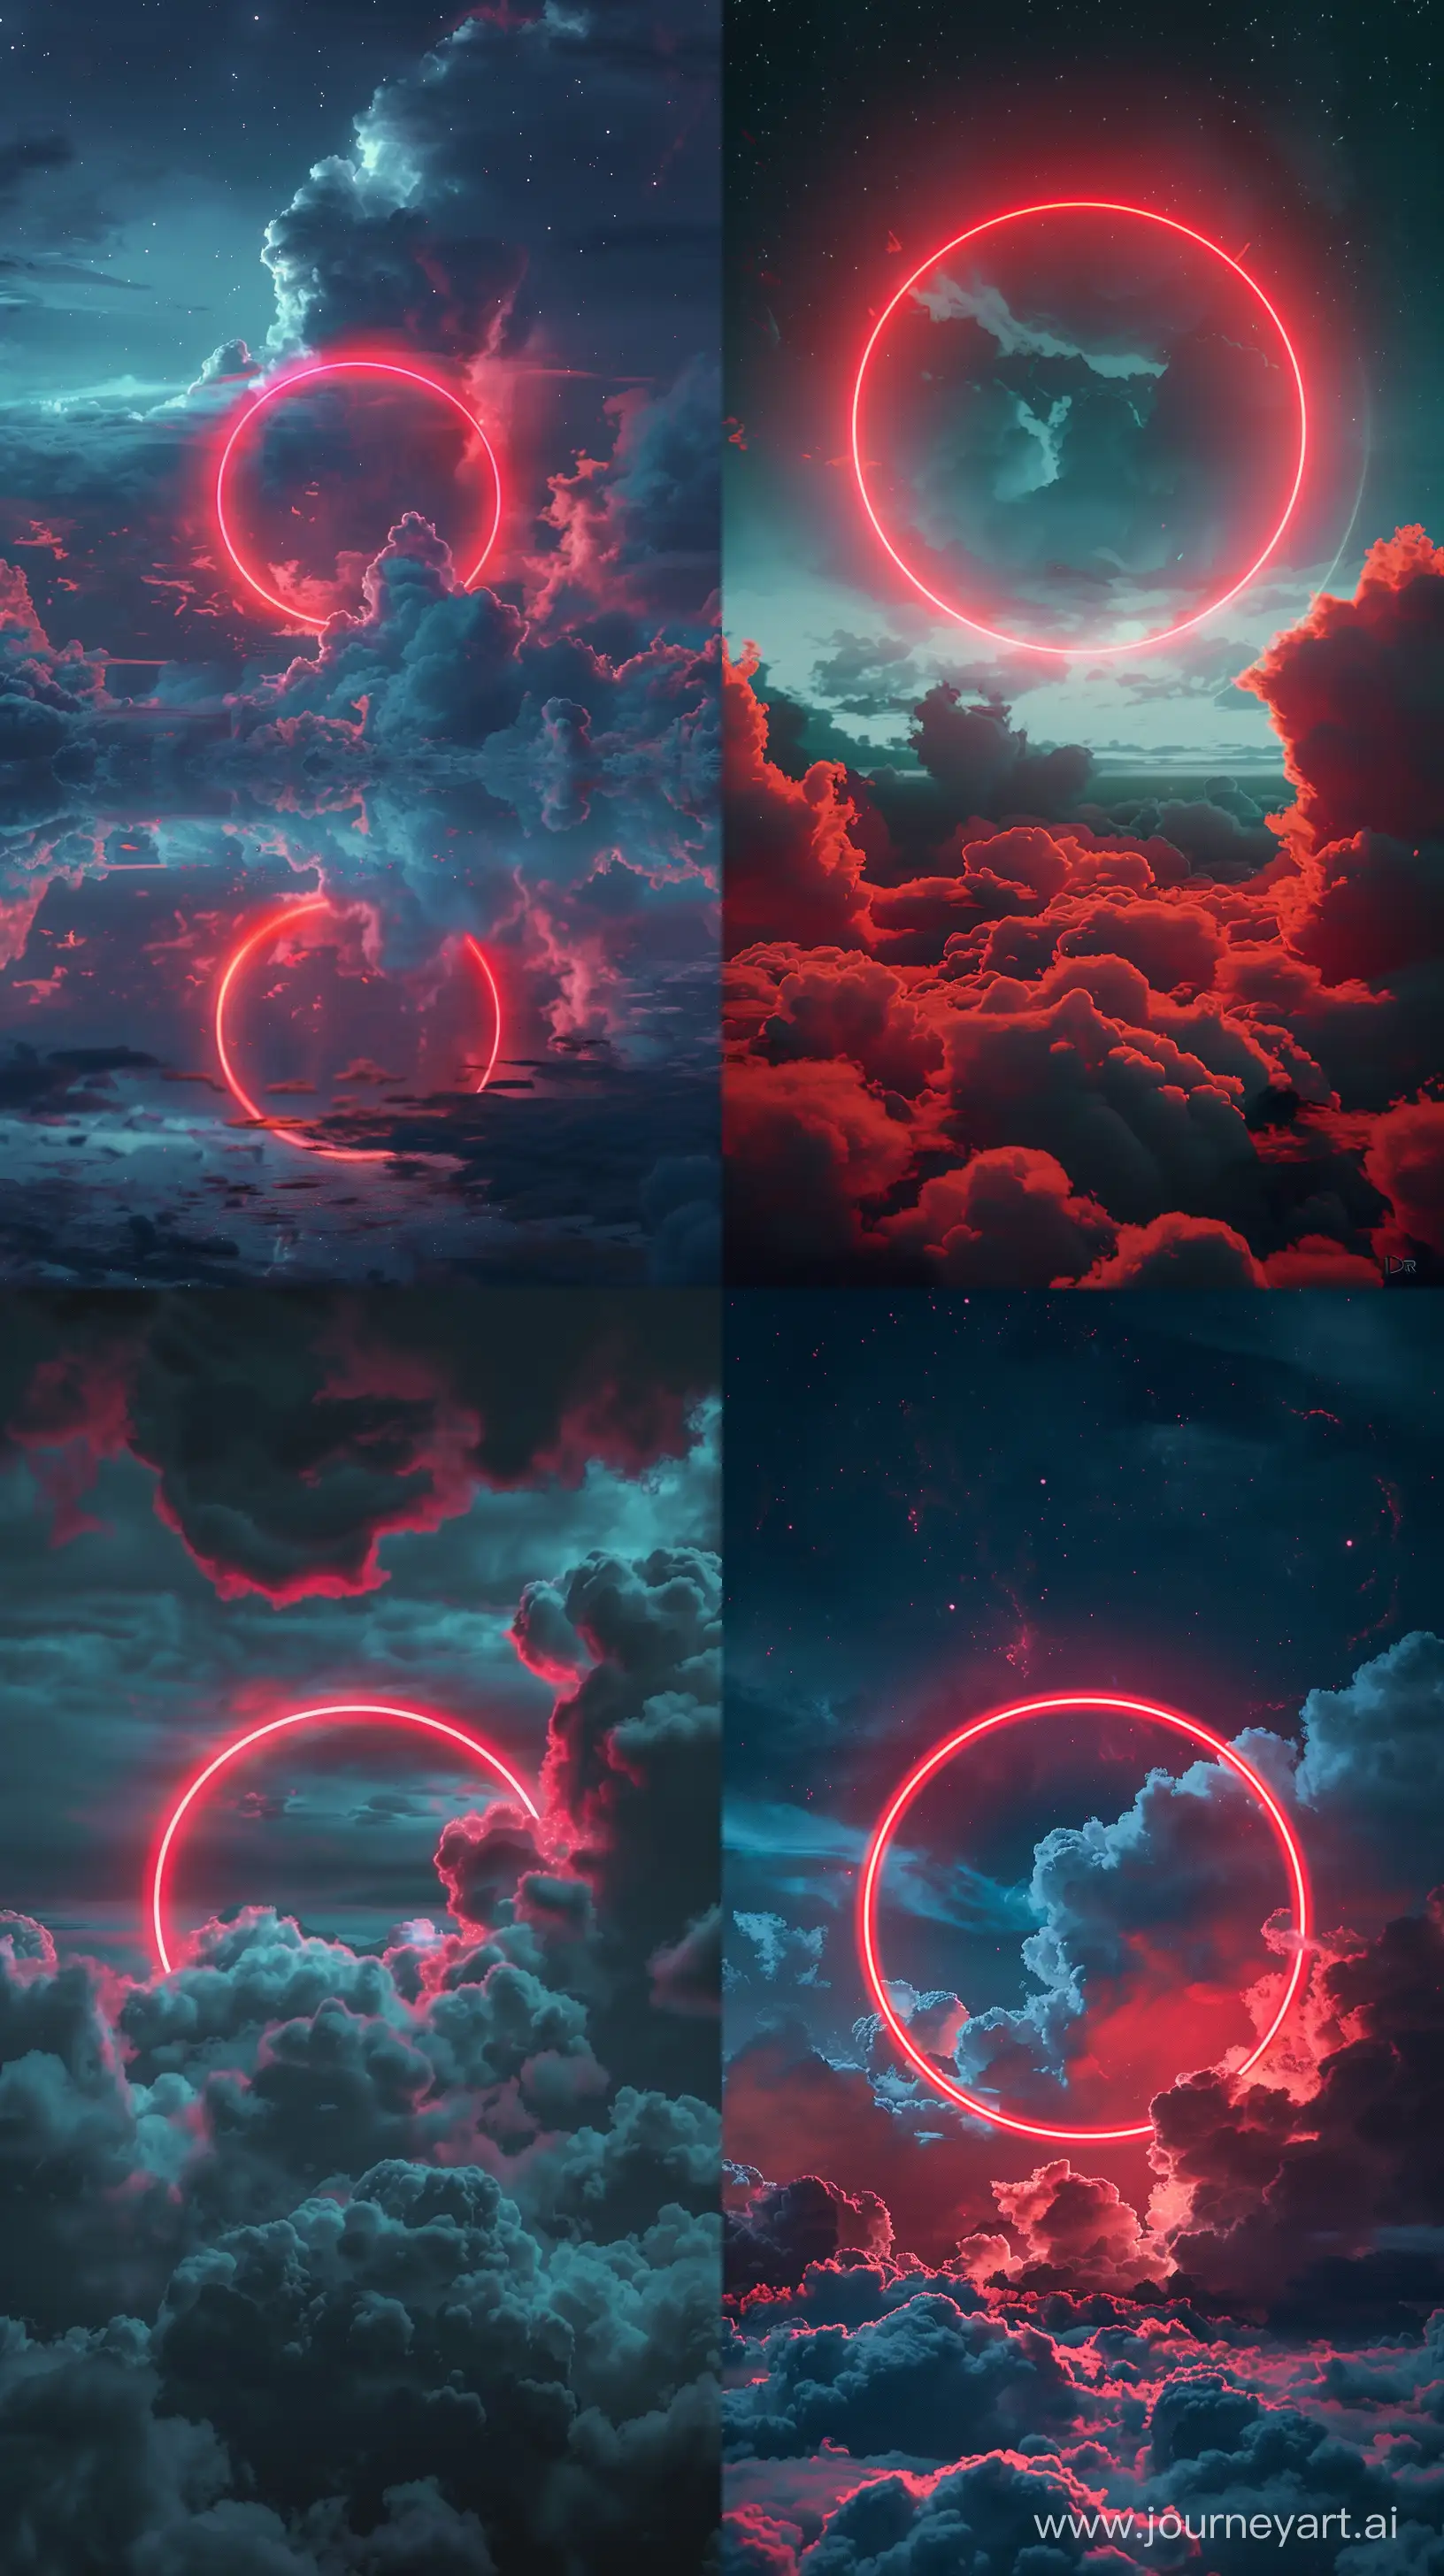 Nighttime-Photography-with-Neon-Red-Circle-and-Cloudy-Sky